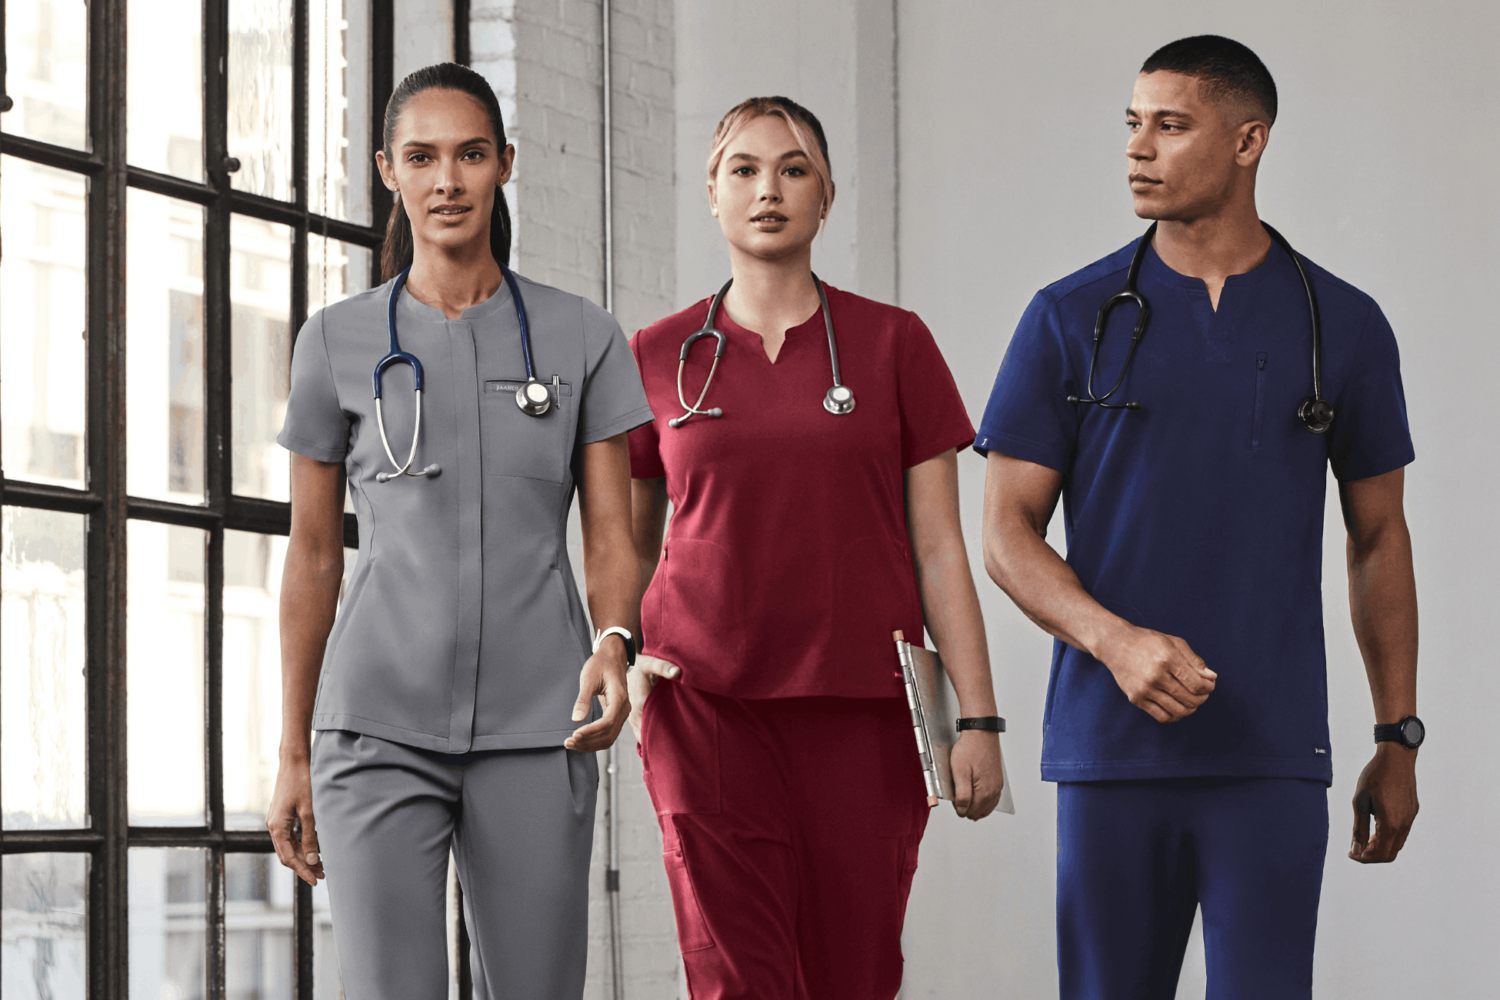 women and men wearing scrubs and stethoscopes